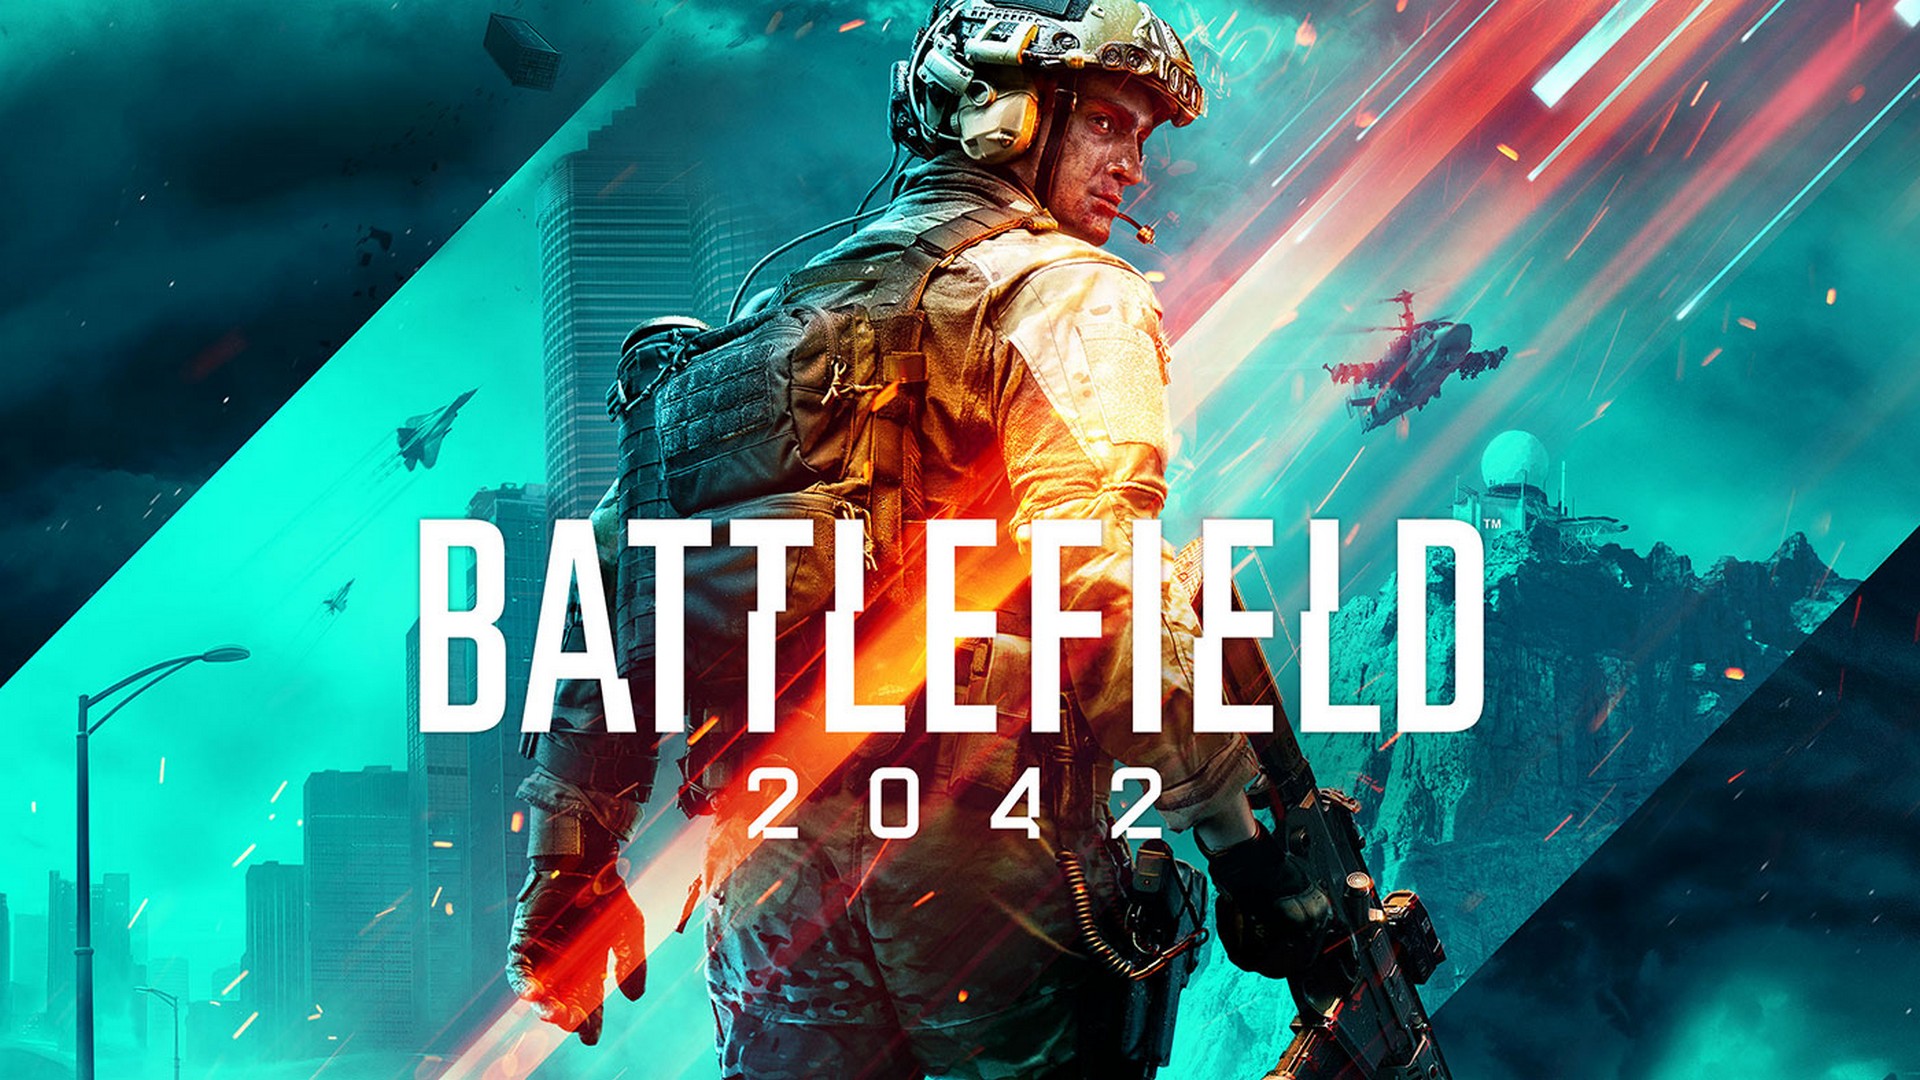 Battlefield 2042 Marks The Return Of All-Out Warfare In New, Unmatched, Epic-Scale Experience